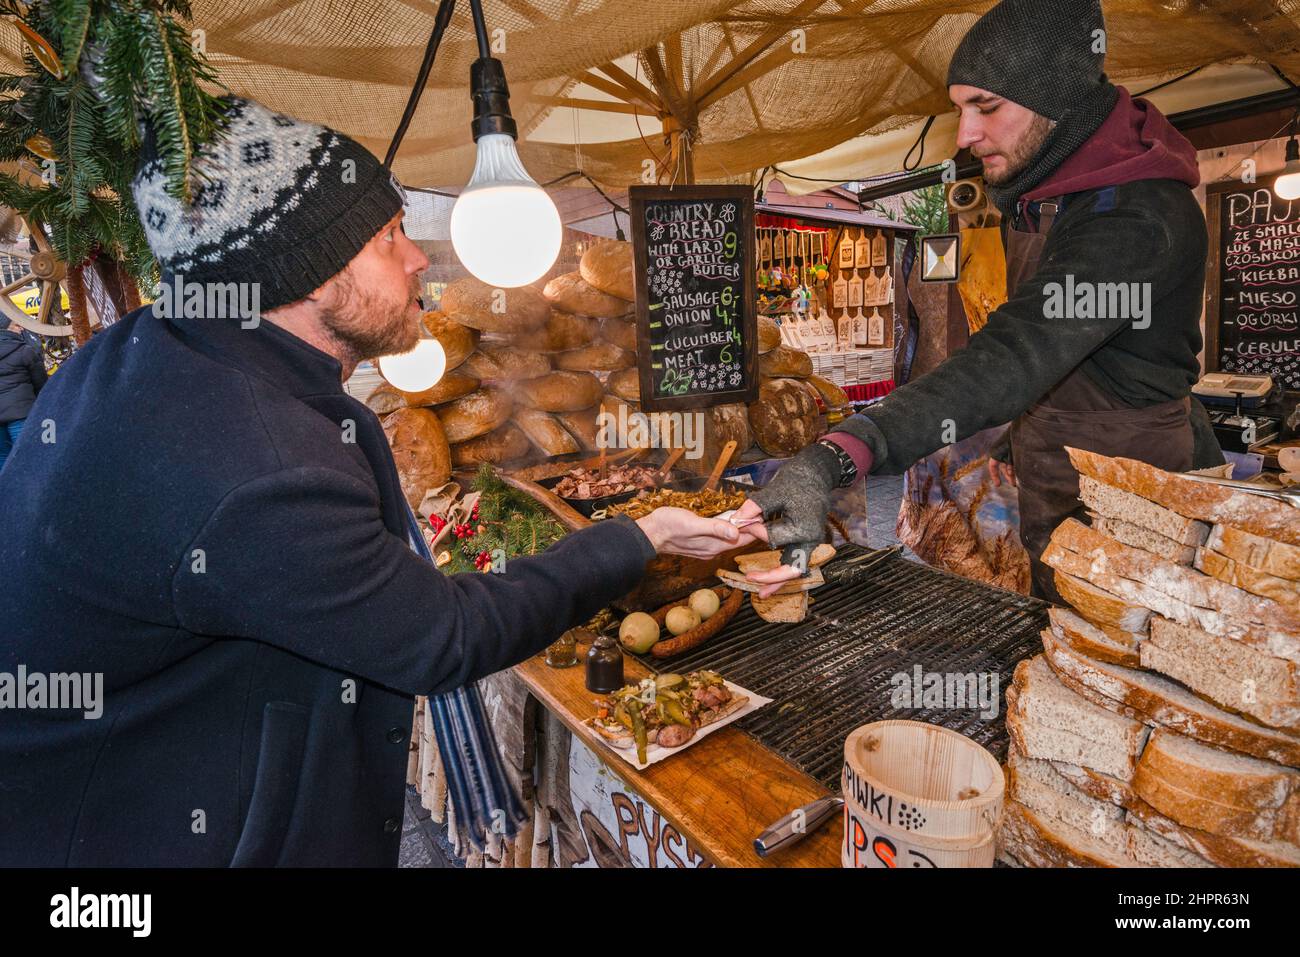 Customer, slices of bread at food stand at Christmas market, Main Market Square, Kraków, Poland Stock Photo